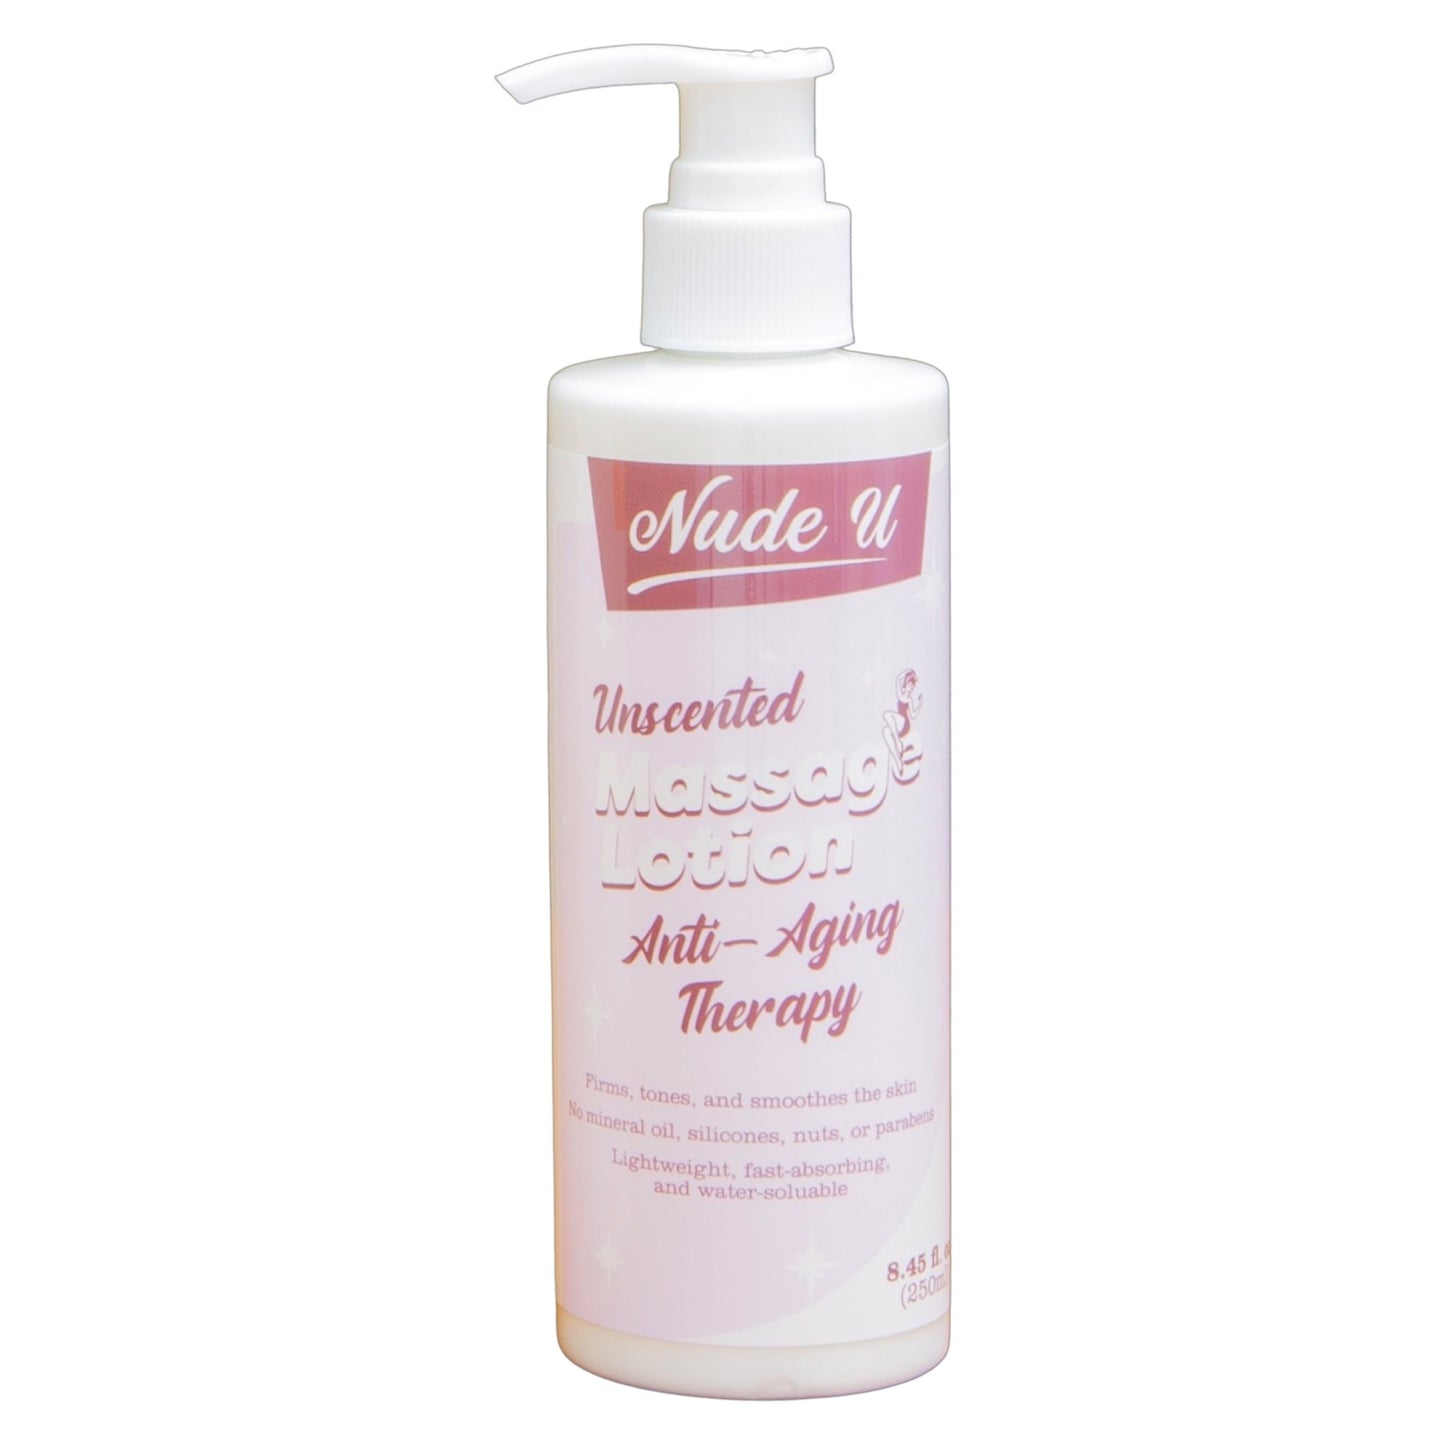 Massage Lotion | Unscented | Anti-Aging Therapy | 8.45 fl.oz. | NUDE U - SH Salons